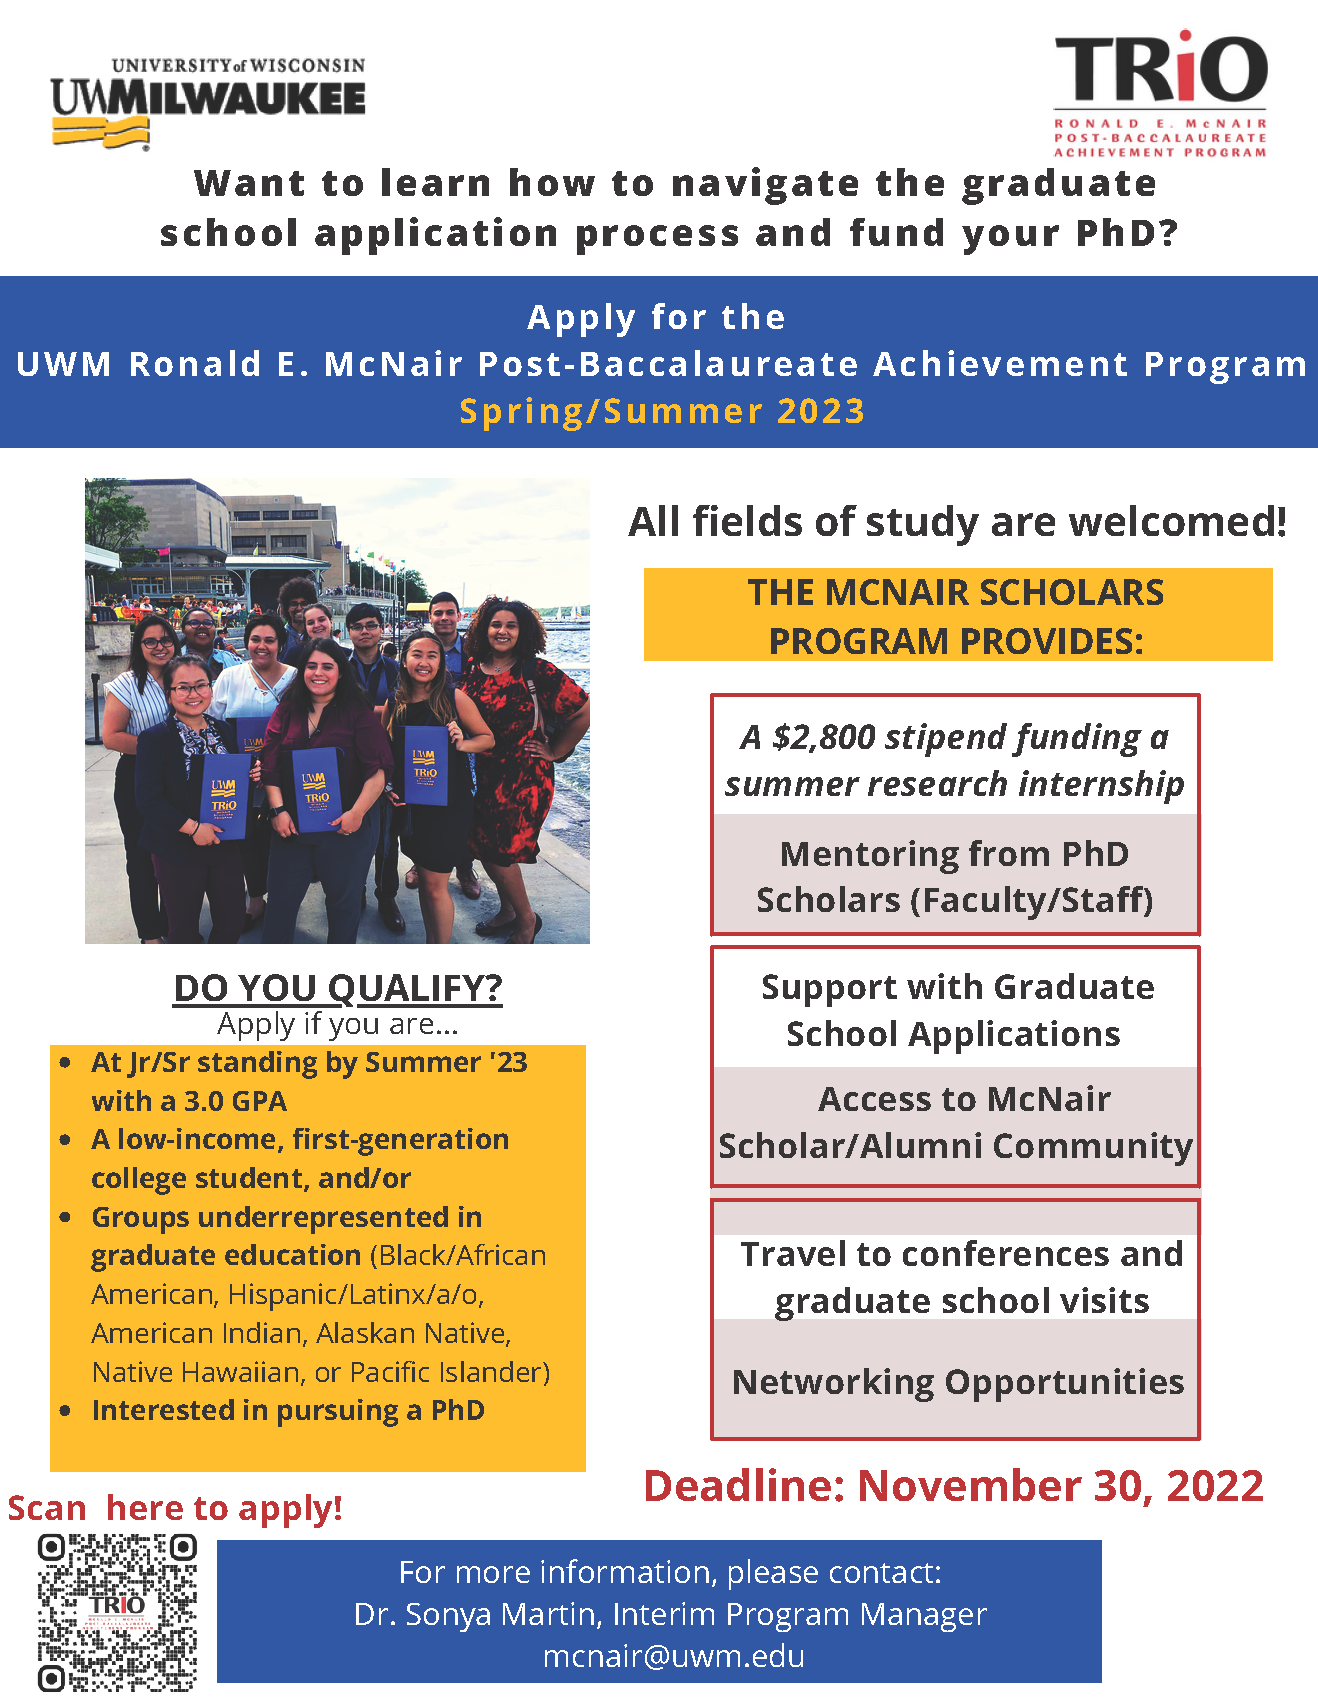 Flyer with information about the UWM Ronald E. McNair Achievement Program for Spring/Summer 2023